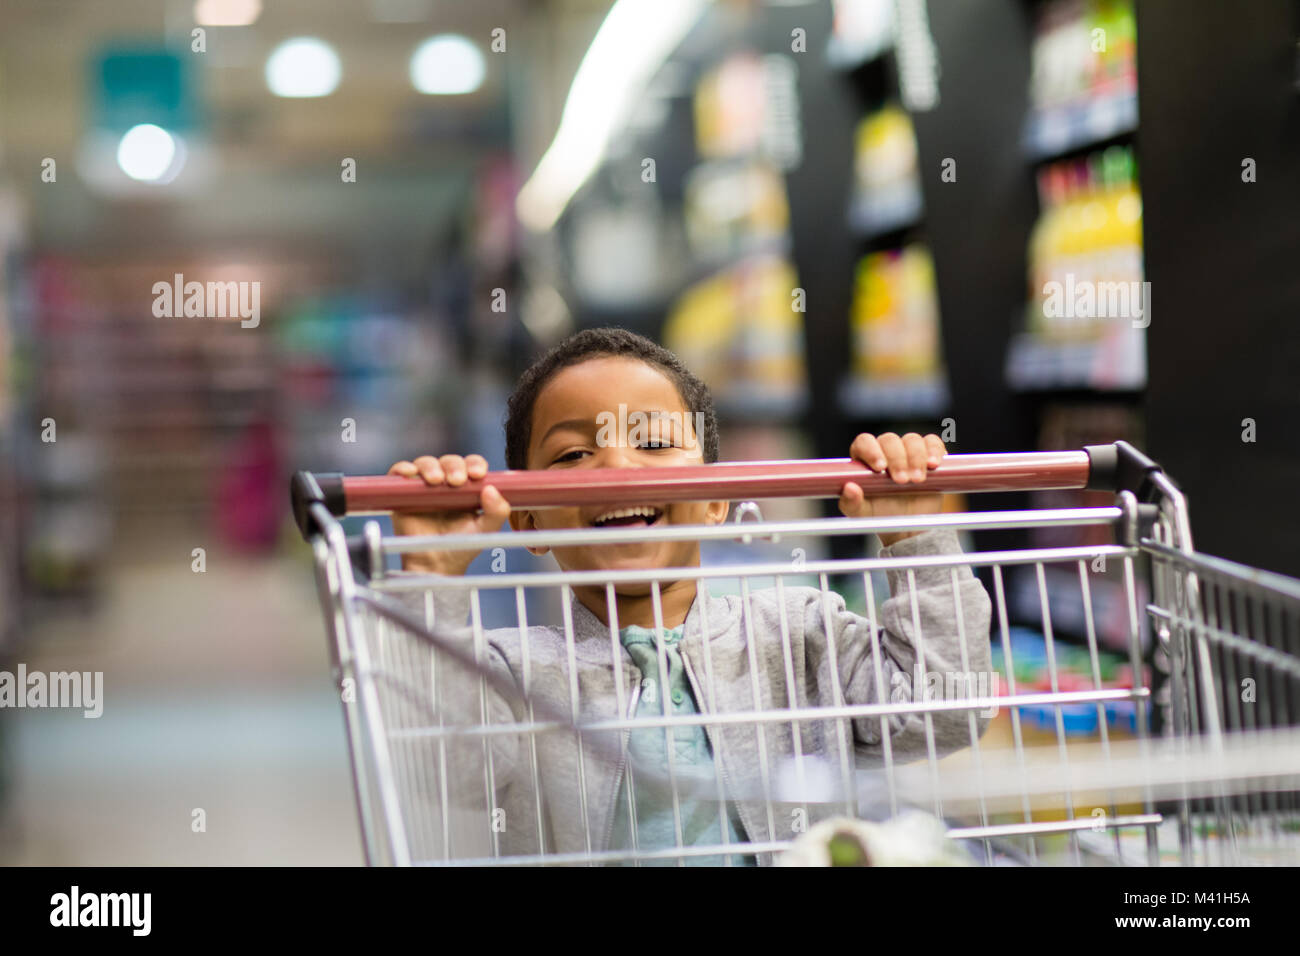 Young boy pushing trolley in grocery store Stock Photo